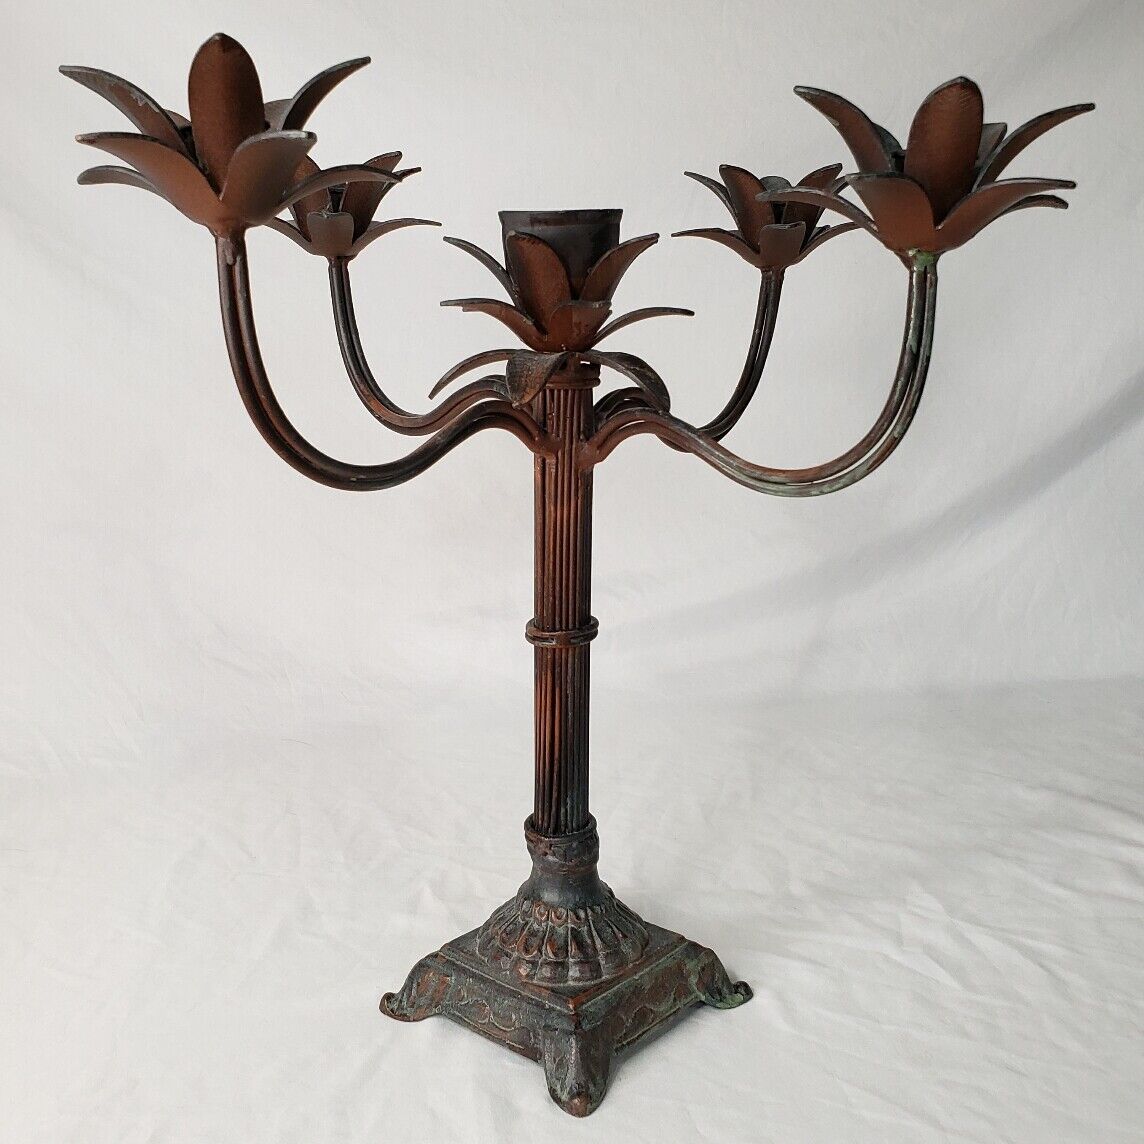 Vintage Wrought Iron 5 Candle Palm Leaves Candelabra Candle Holder  15” H x 17”W